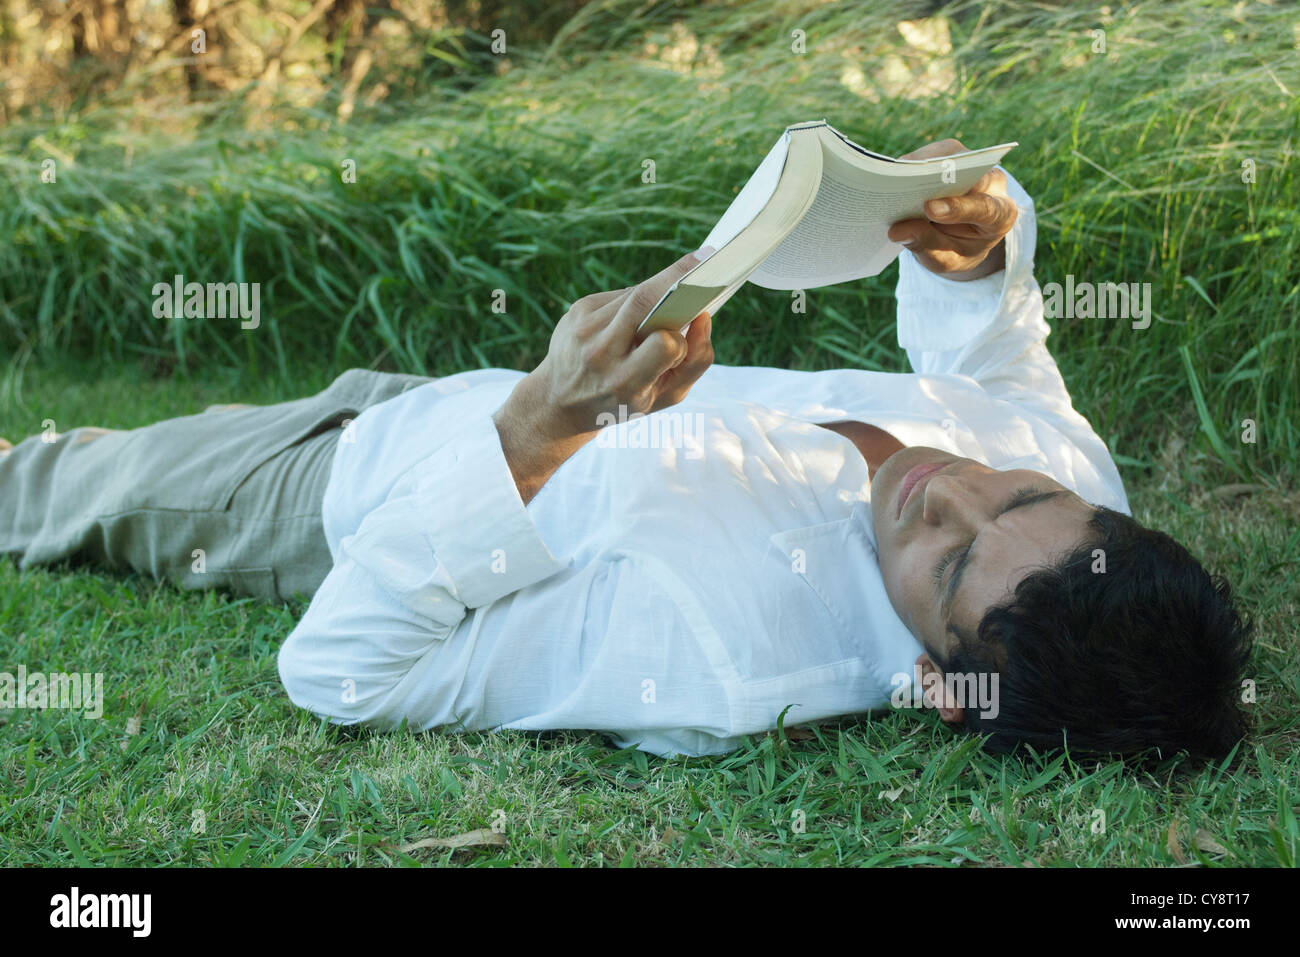 Mid-adult man lying on grass reading book Stock Photo